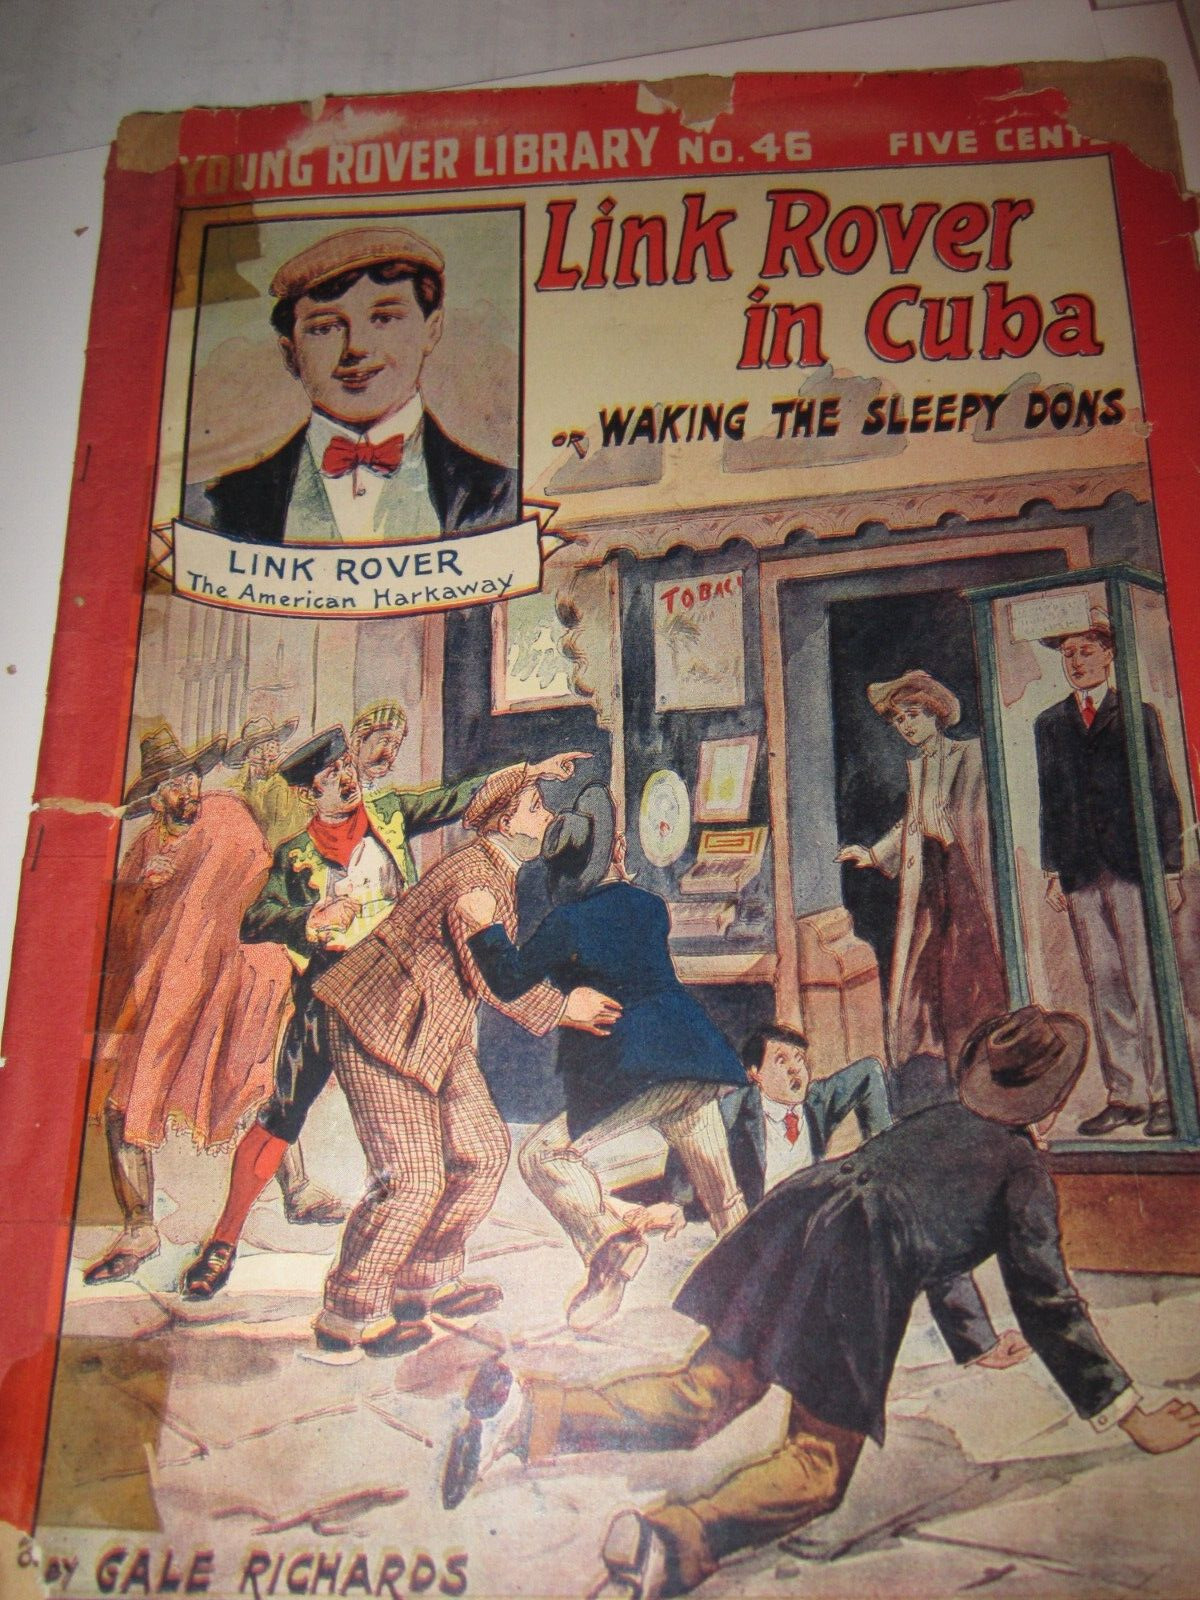 VTG YOUNG ROVER LIBRARY #46 8/5/1909 LINK ROVER IN CUBA OVER 1OO YEAR OLD 31 PGS